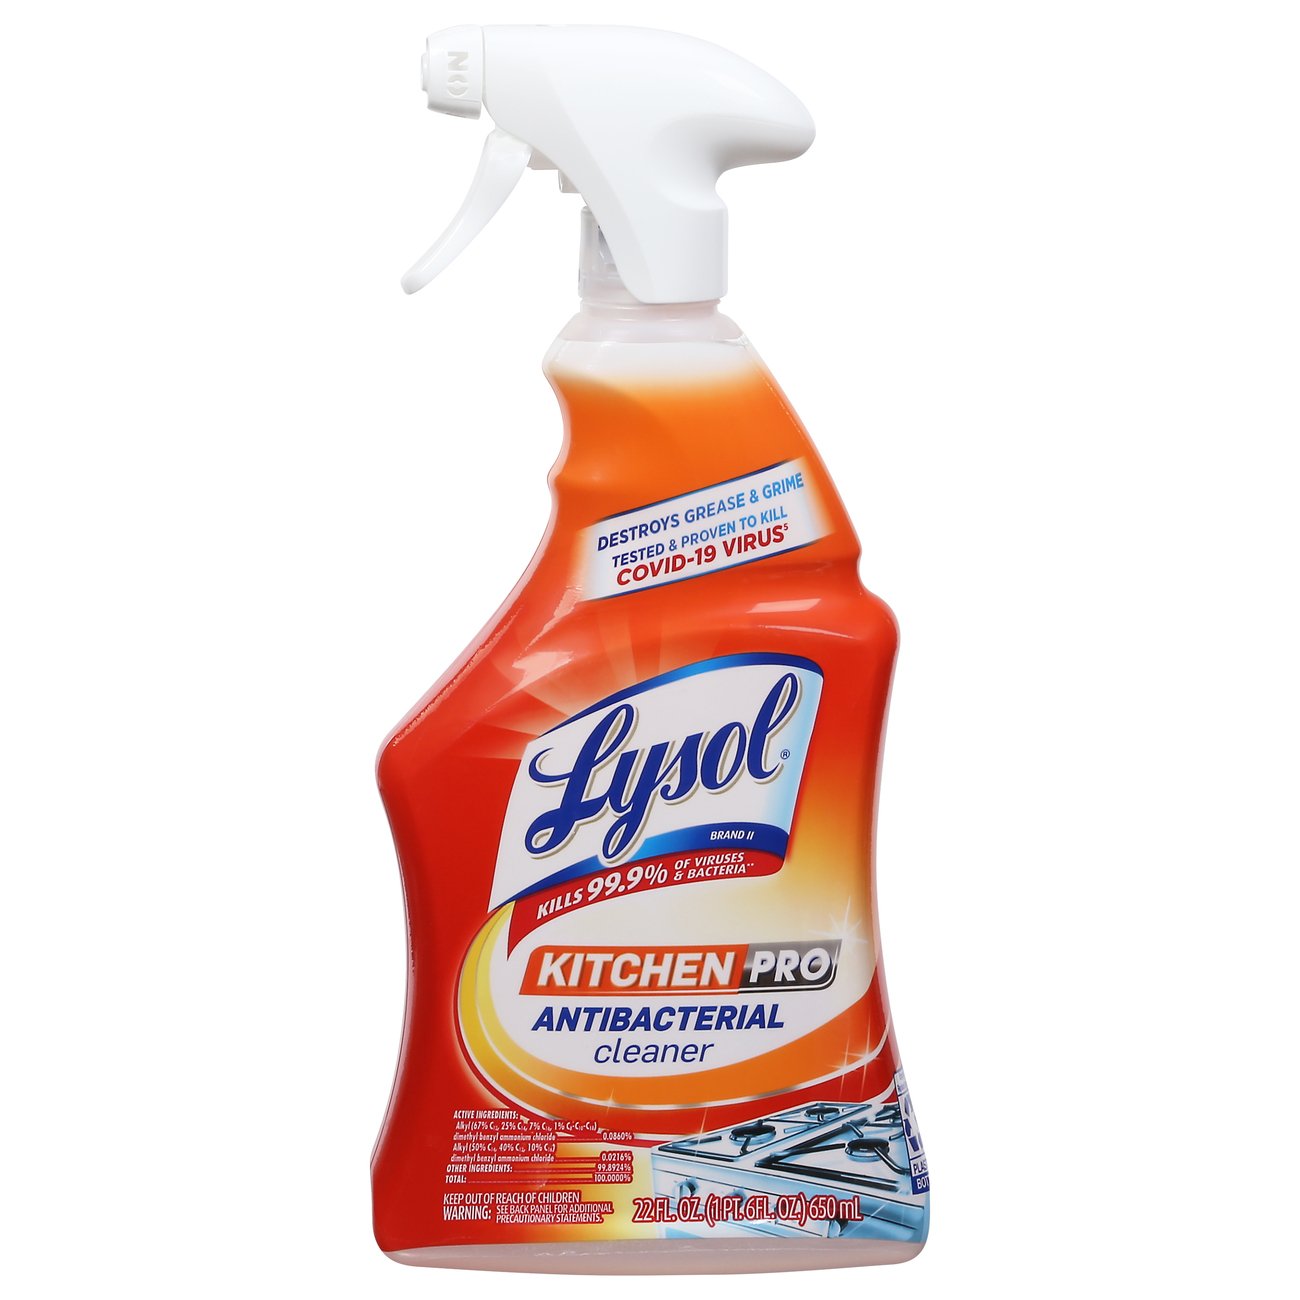 Lysol Kitchen Pro Antibacterial Cleaner Spray - Shop All Purpose ...
